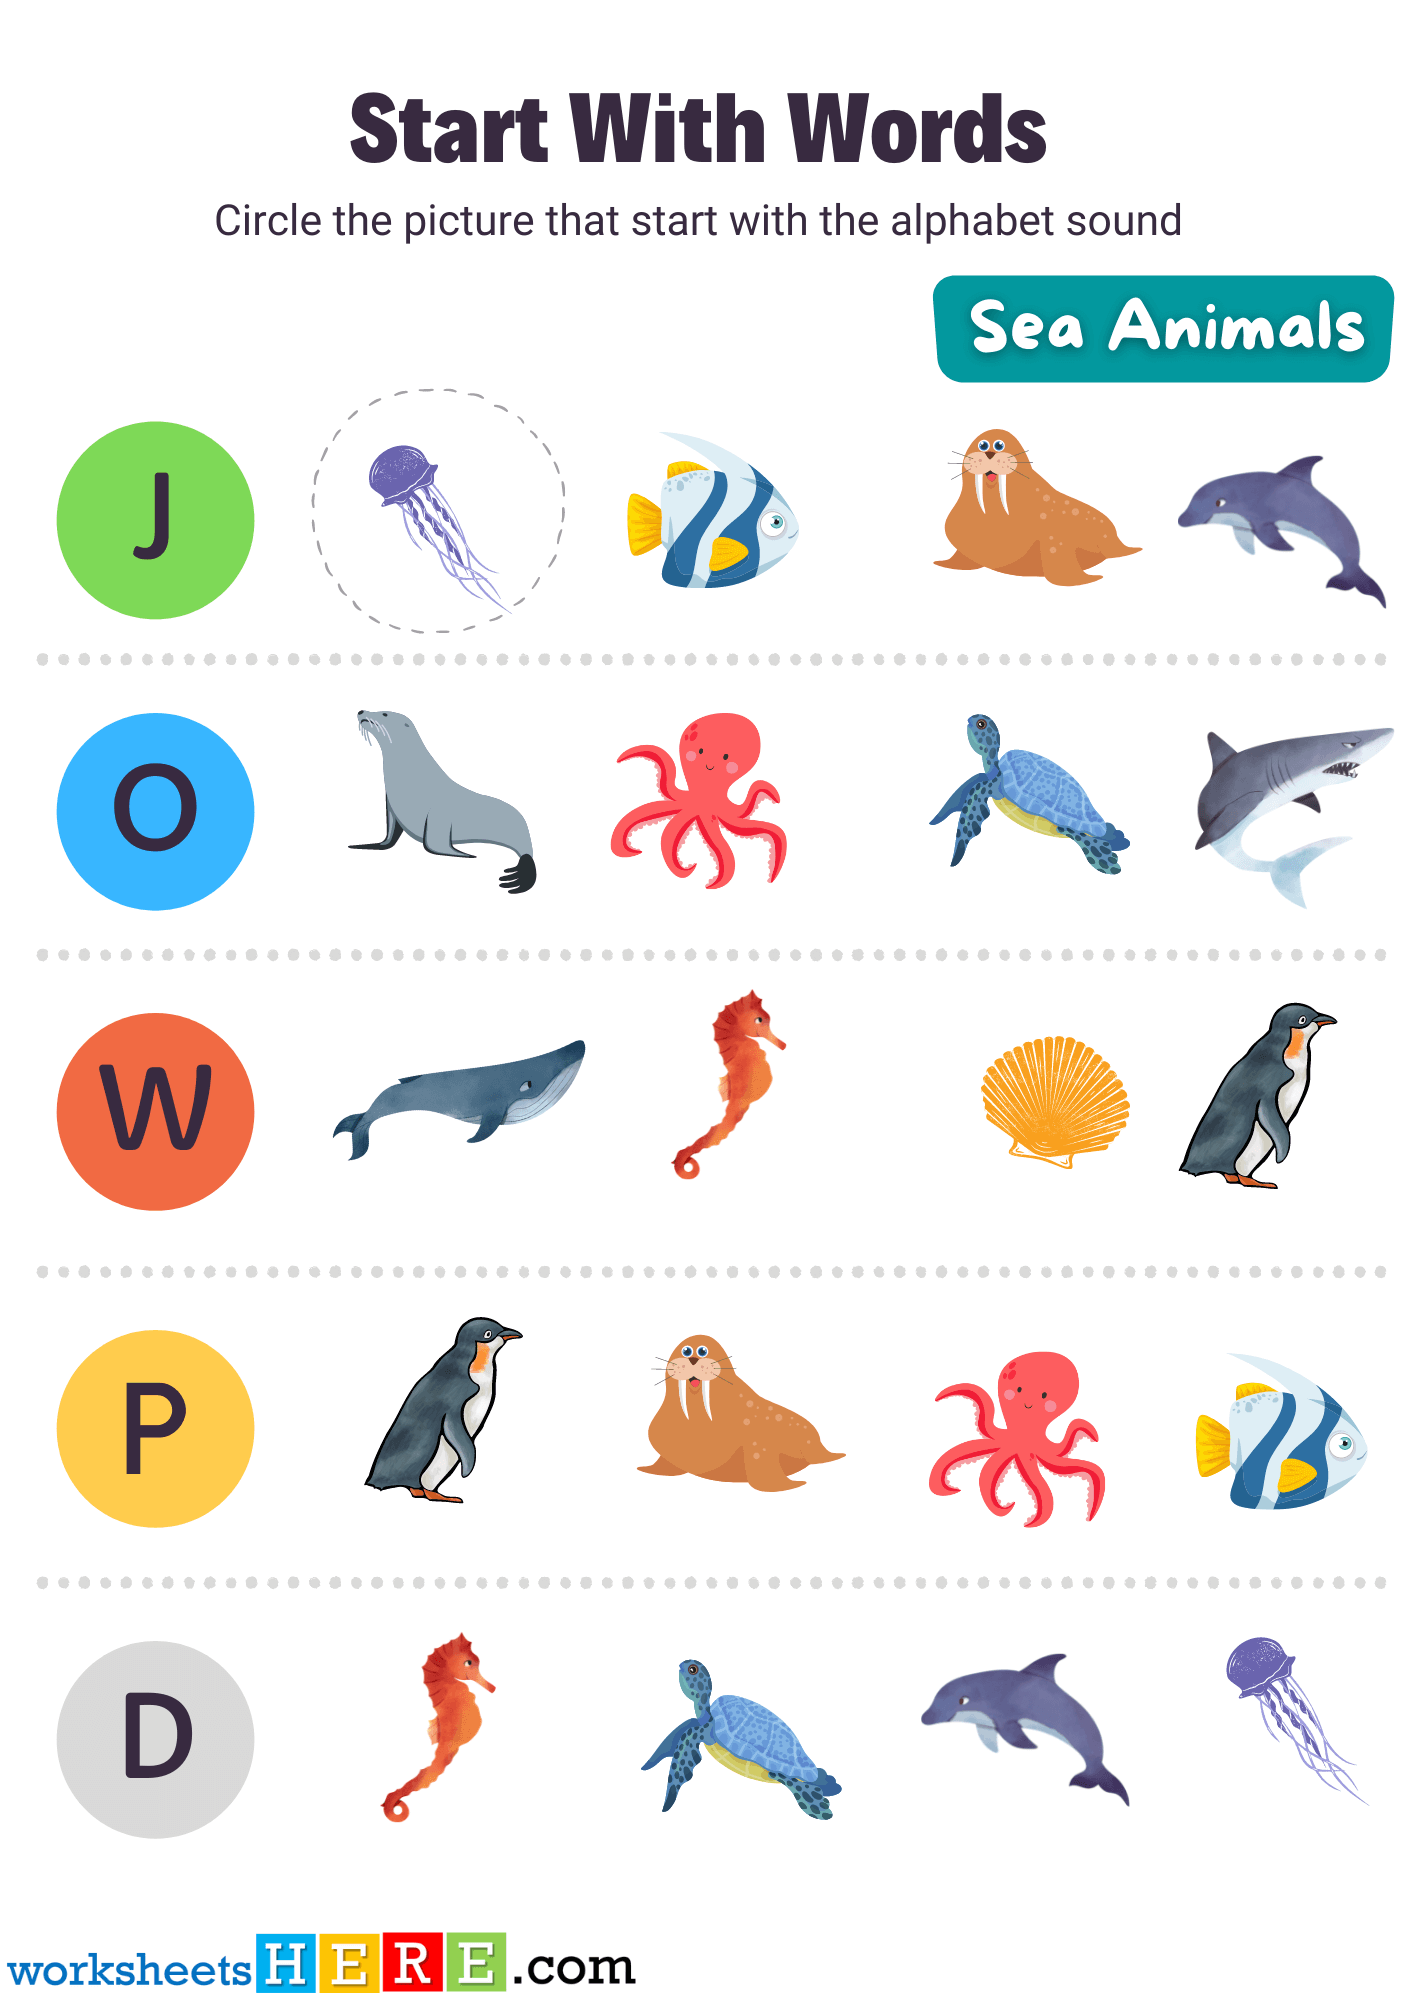 Circle Start With Words Activity About Sea Animals Names, Pdf Worksheets For Kids